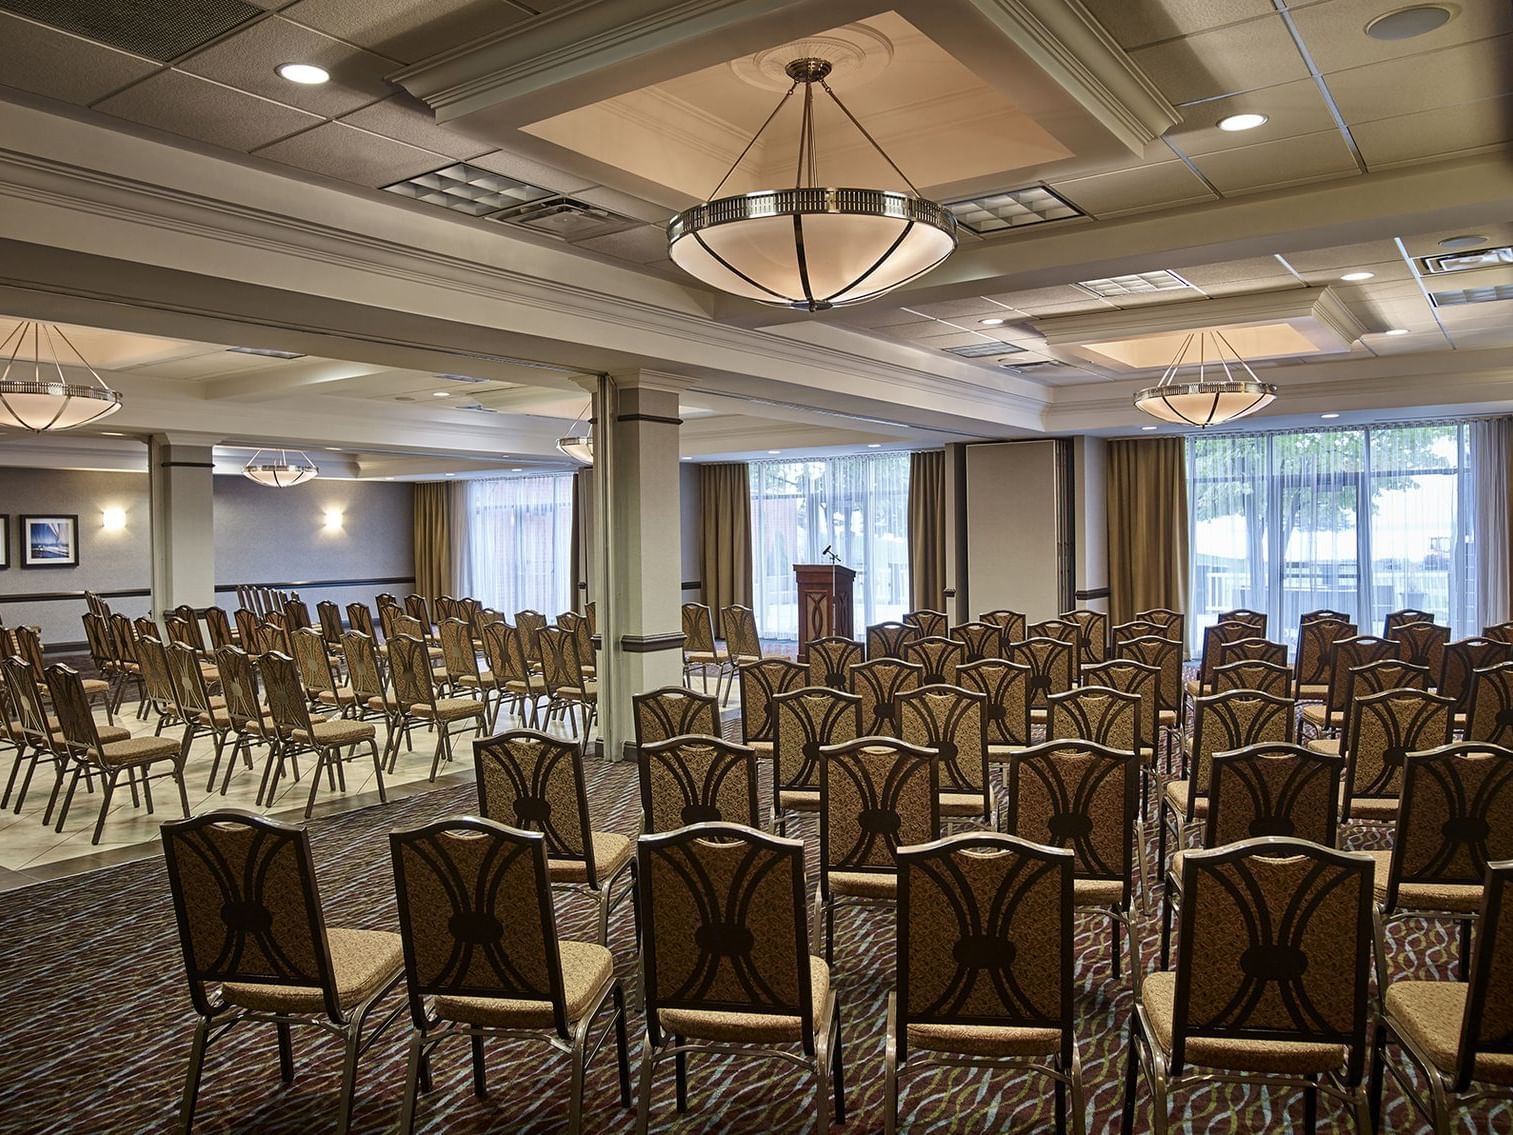 Classroom setup in blue water ballroom at Waterfront Hotel